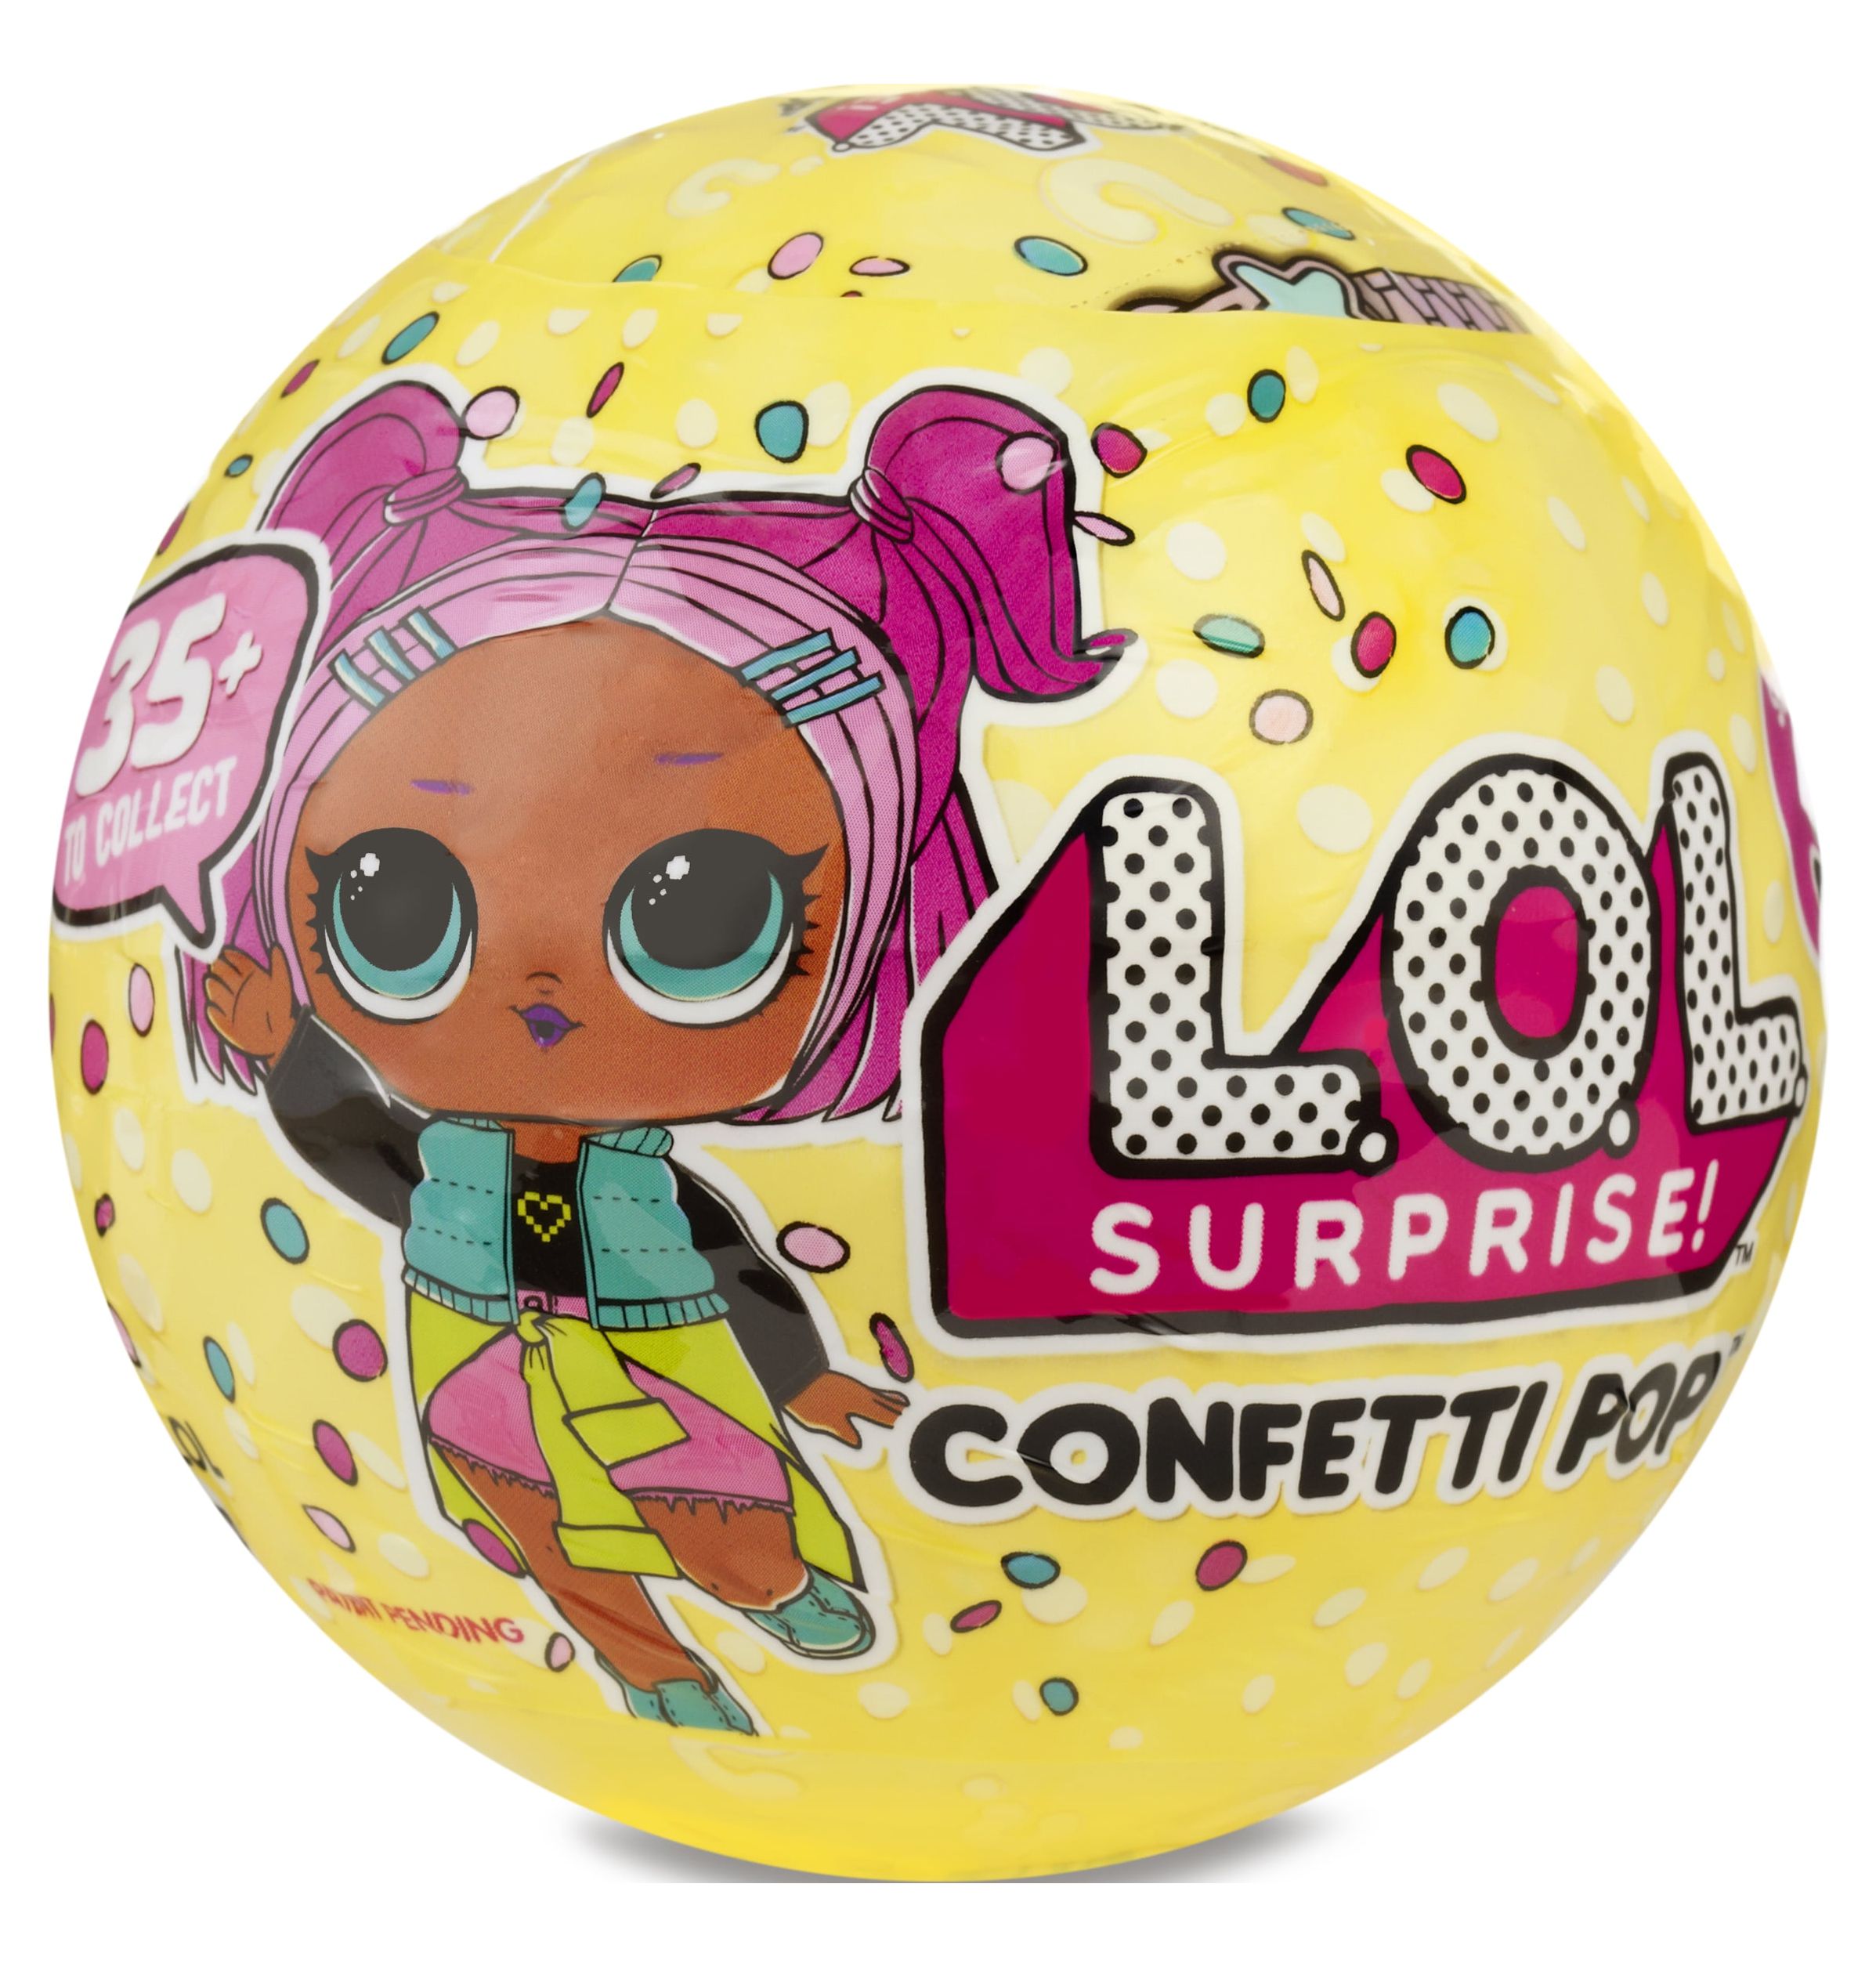 LOL Surprise Series 3 Confetti Pop, Great Gift for Kids Ages 4 5 6+ - image 1 of 3